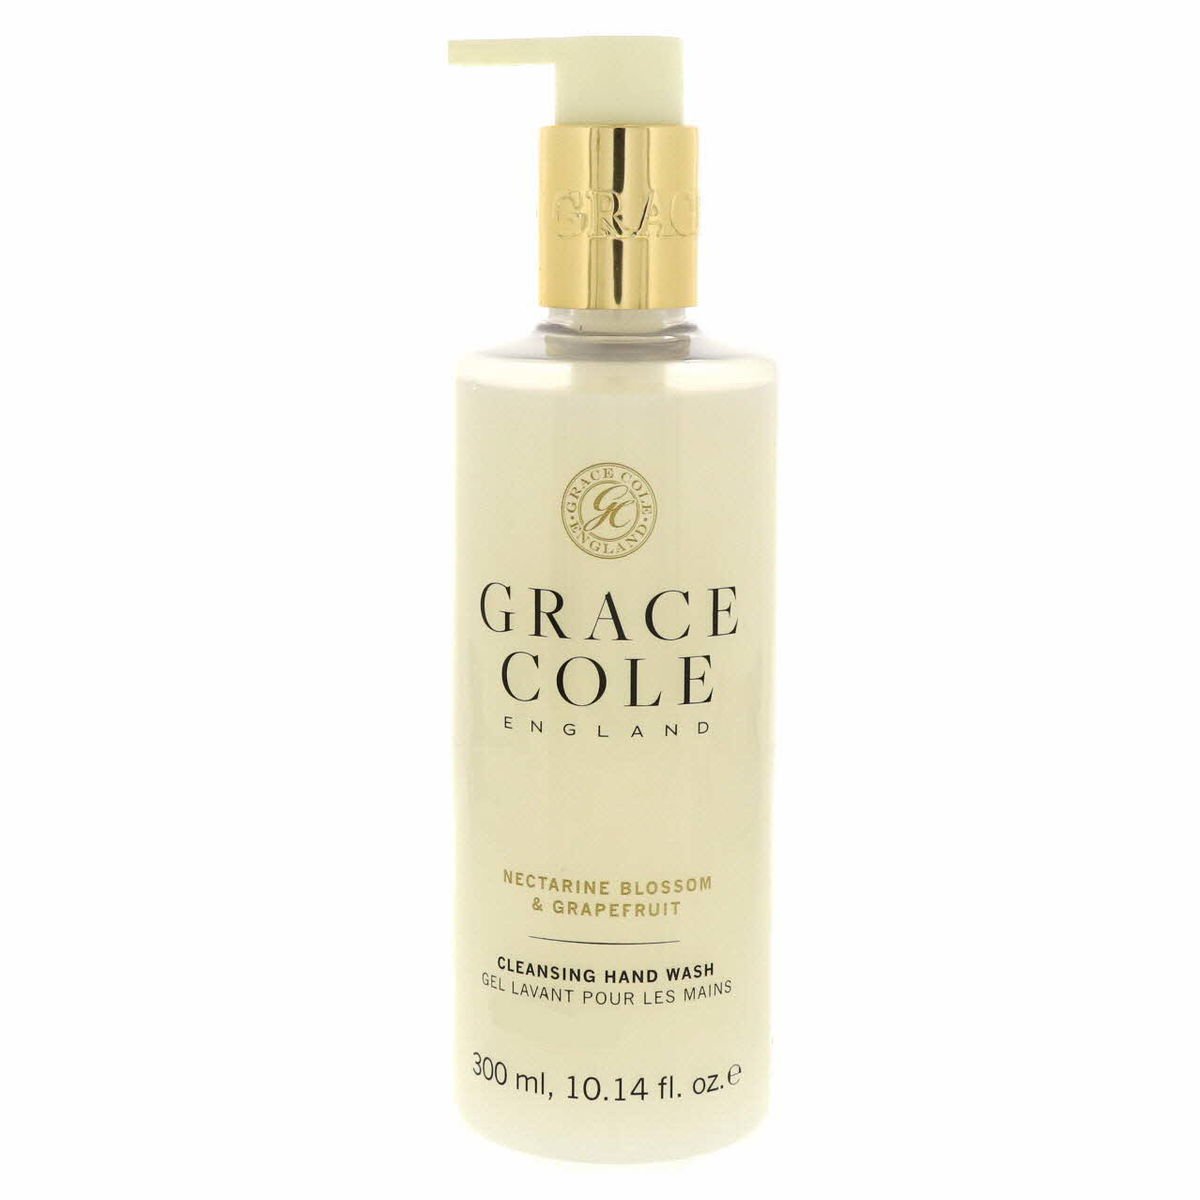 Grace Cole Cleansing Hand Wash Nectarine Blossom And Grapefruit 300ml